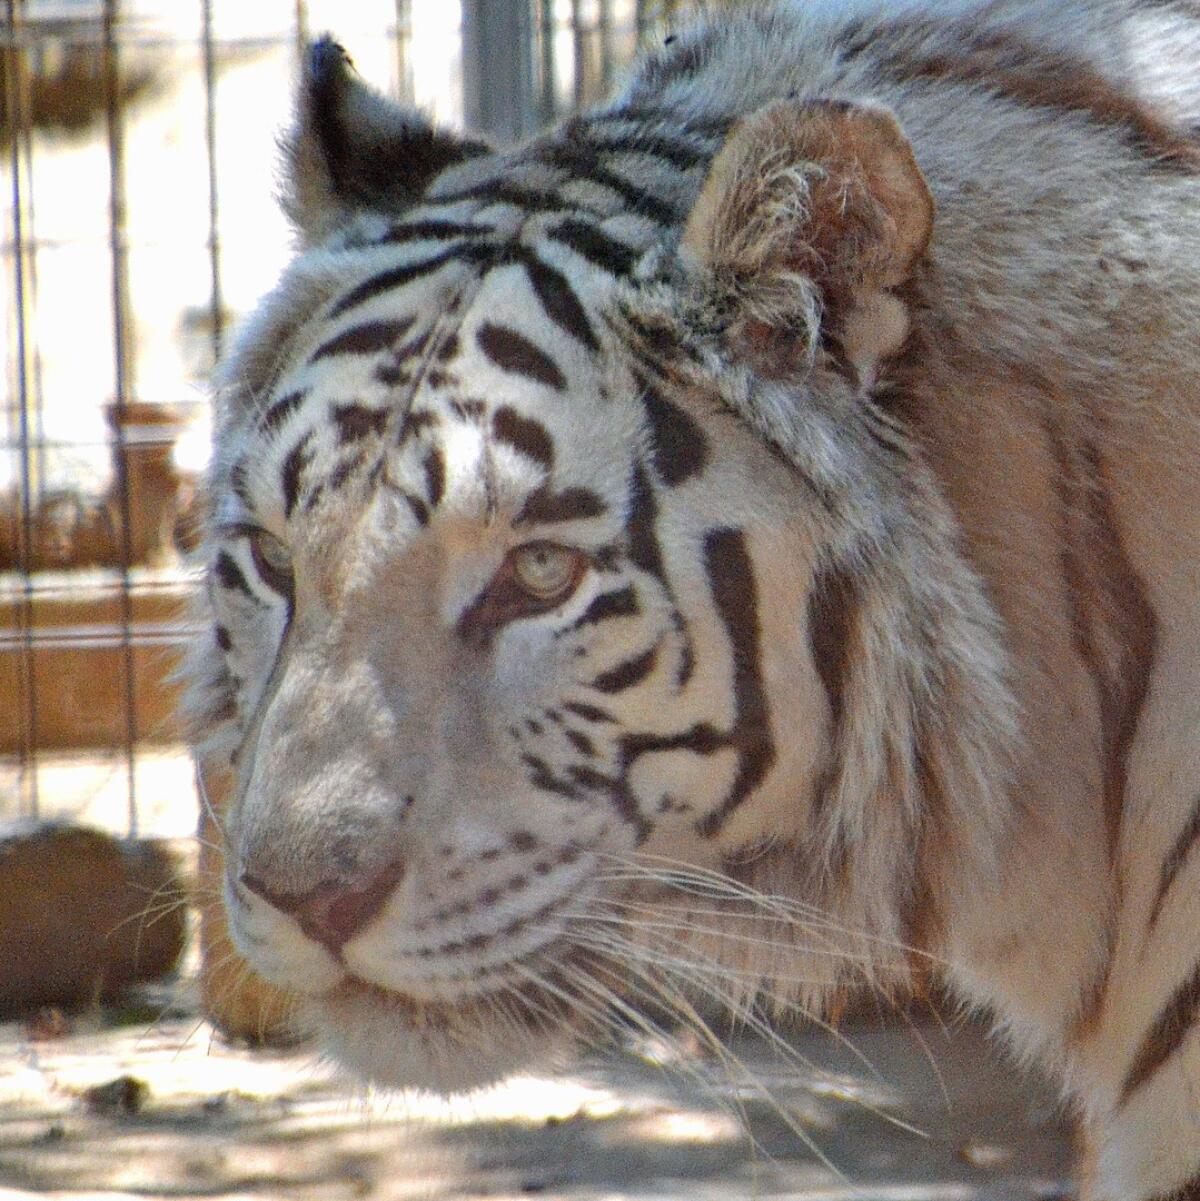 Lily the tiger was rescued and now lives at Rancho Las Lomas in Orange County, which has a wildlife preserve. She is a white tiger, which is rare.